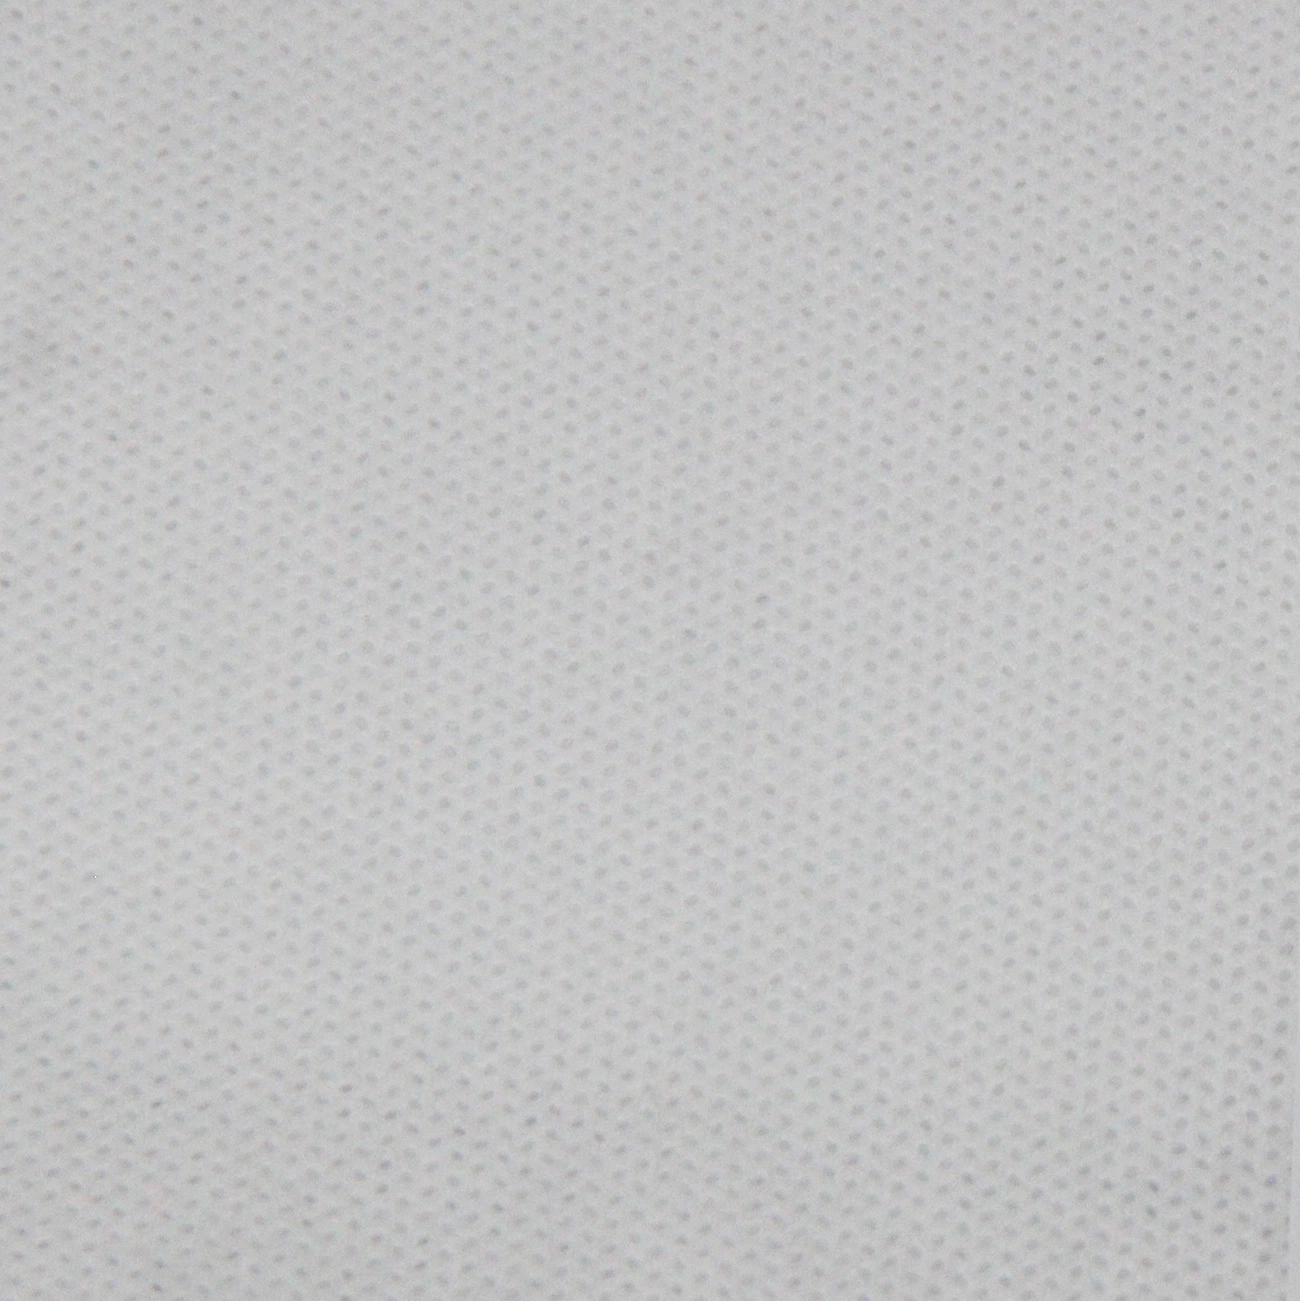 100%PP Spunbonded Nonwoven Fabrics for Medical Supplies